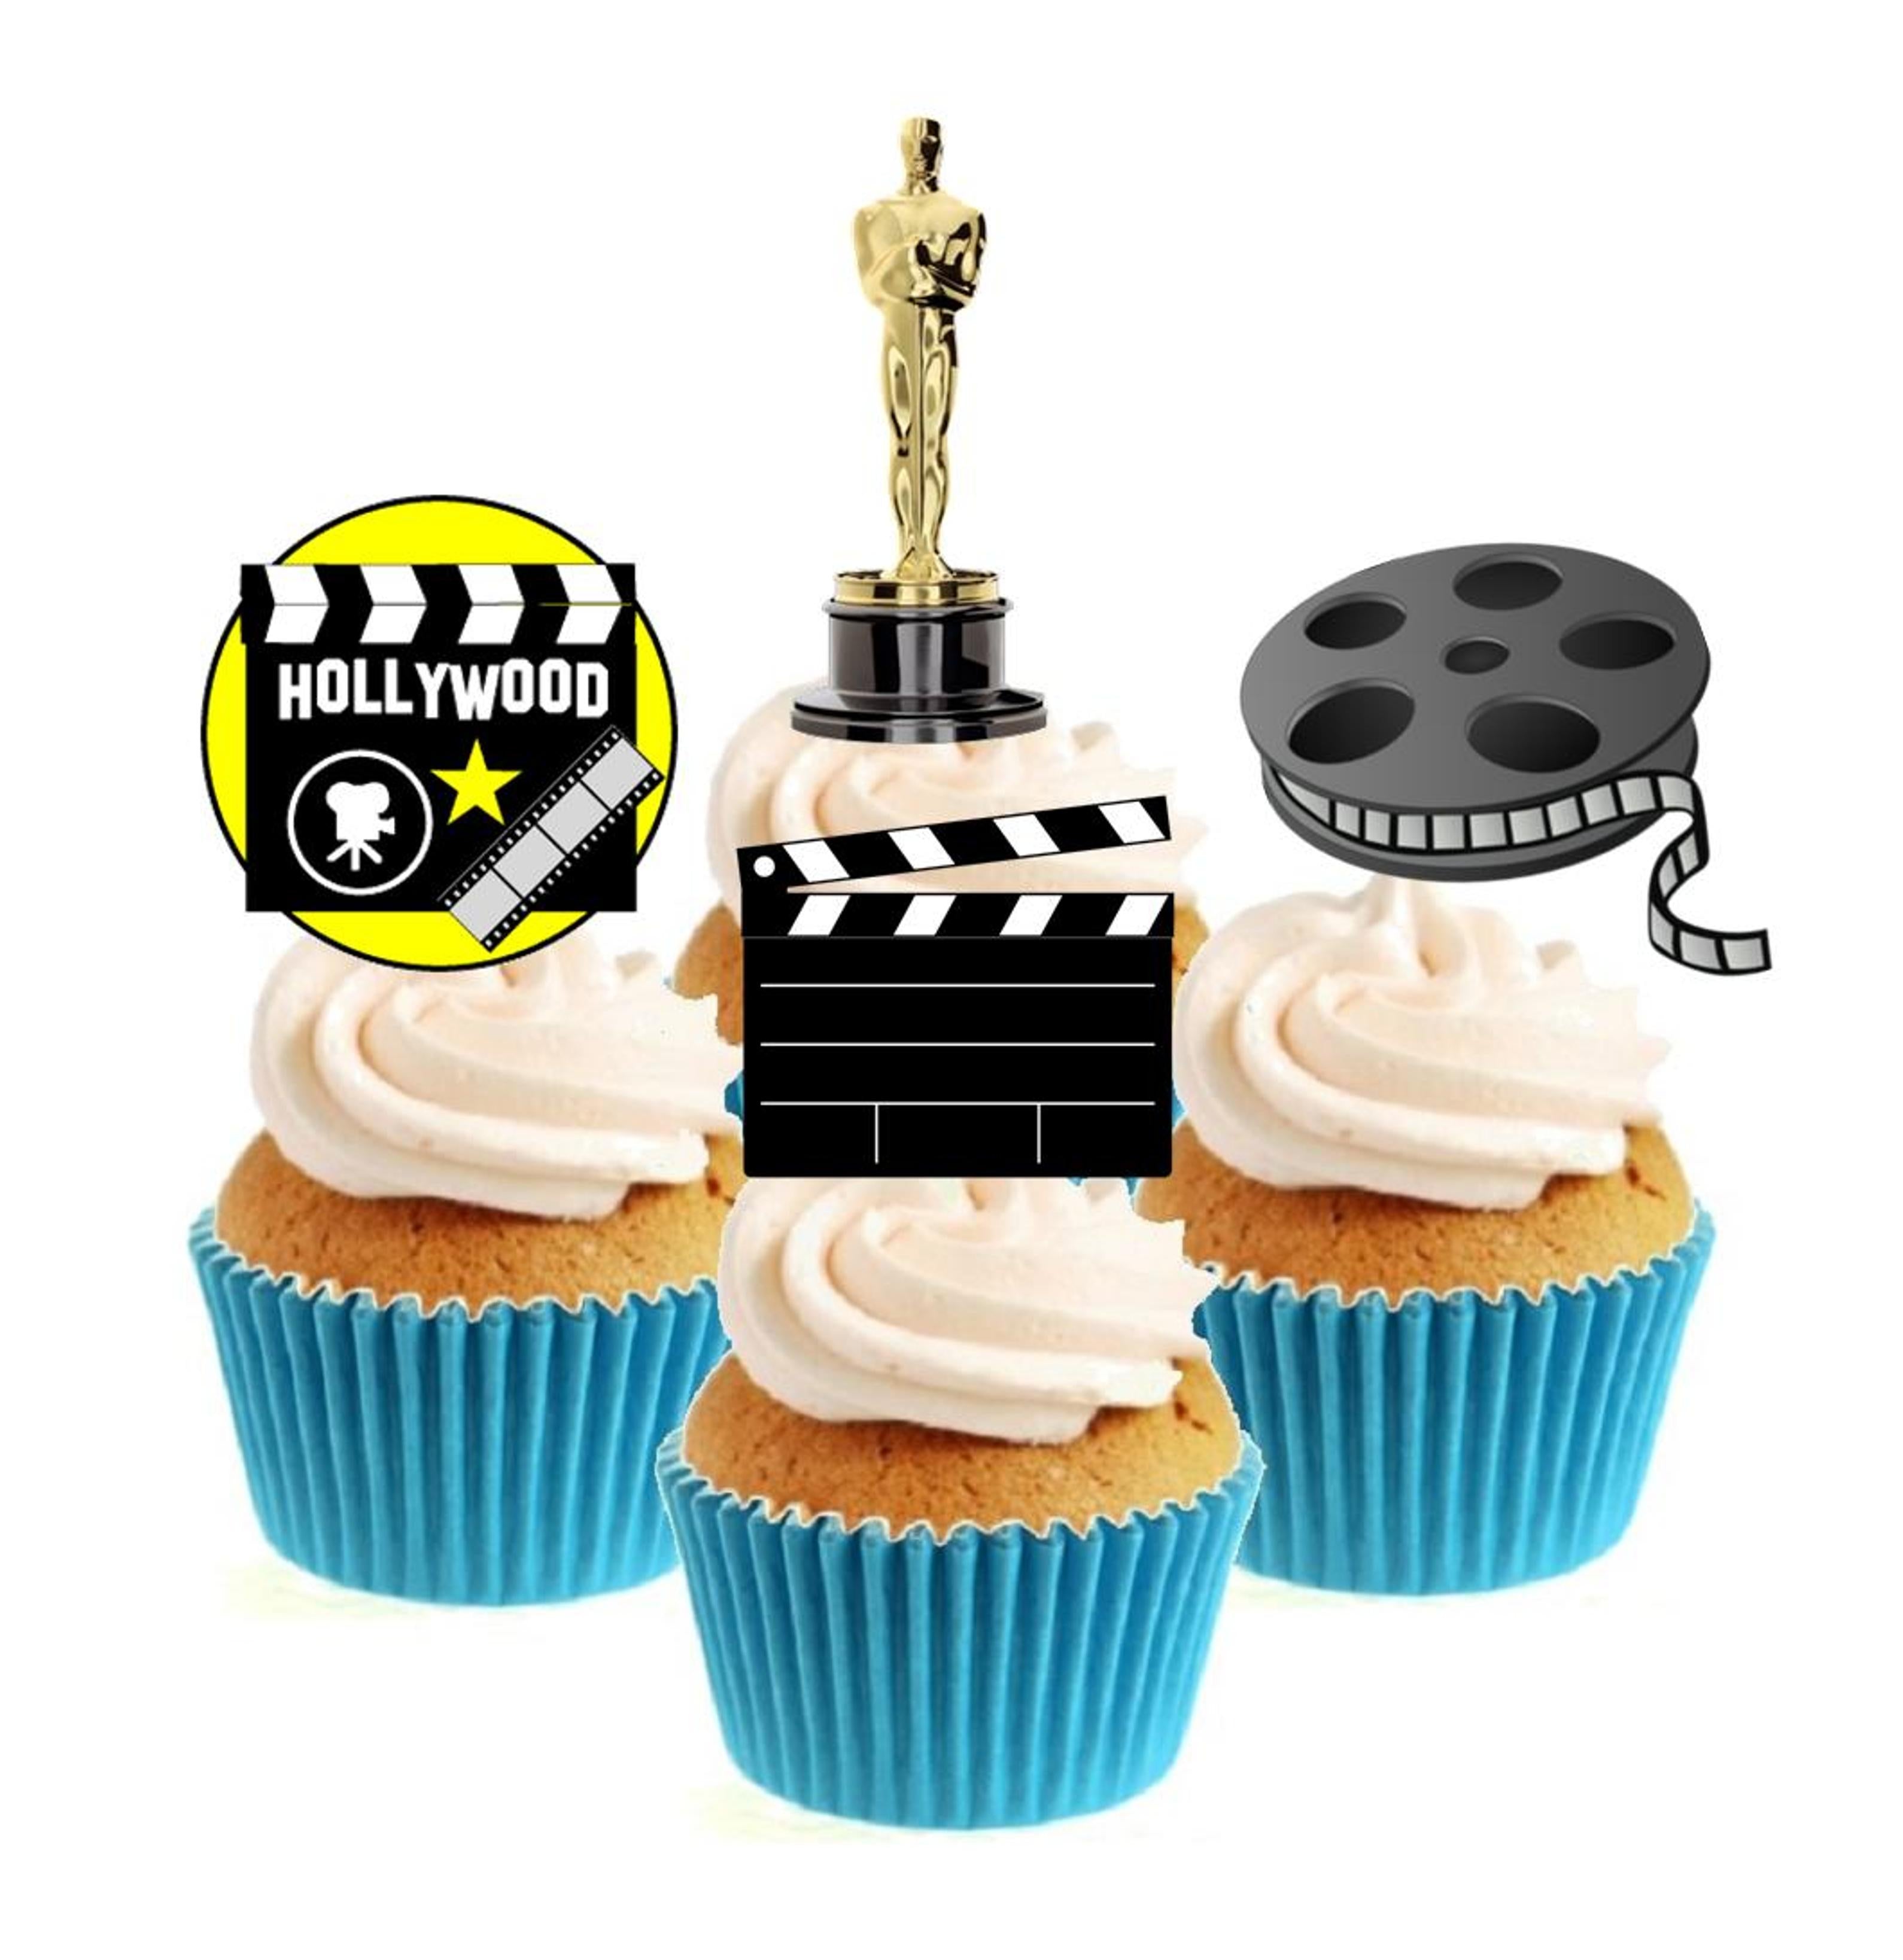 Movie Night Cupcake Toppers 12 Pcs Hollywood Movie/Film/Cinema Theme  Cupcake Toppers Cupcake Decorations for Movie Theme Party, Baby Shower Party,  Birthday Party, Wedding Party, Graduation Party by wangjiangda - Shop  Online for